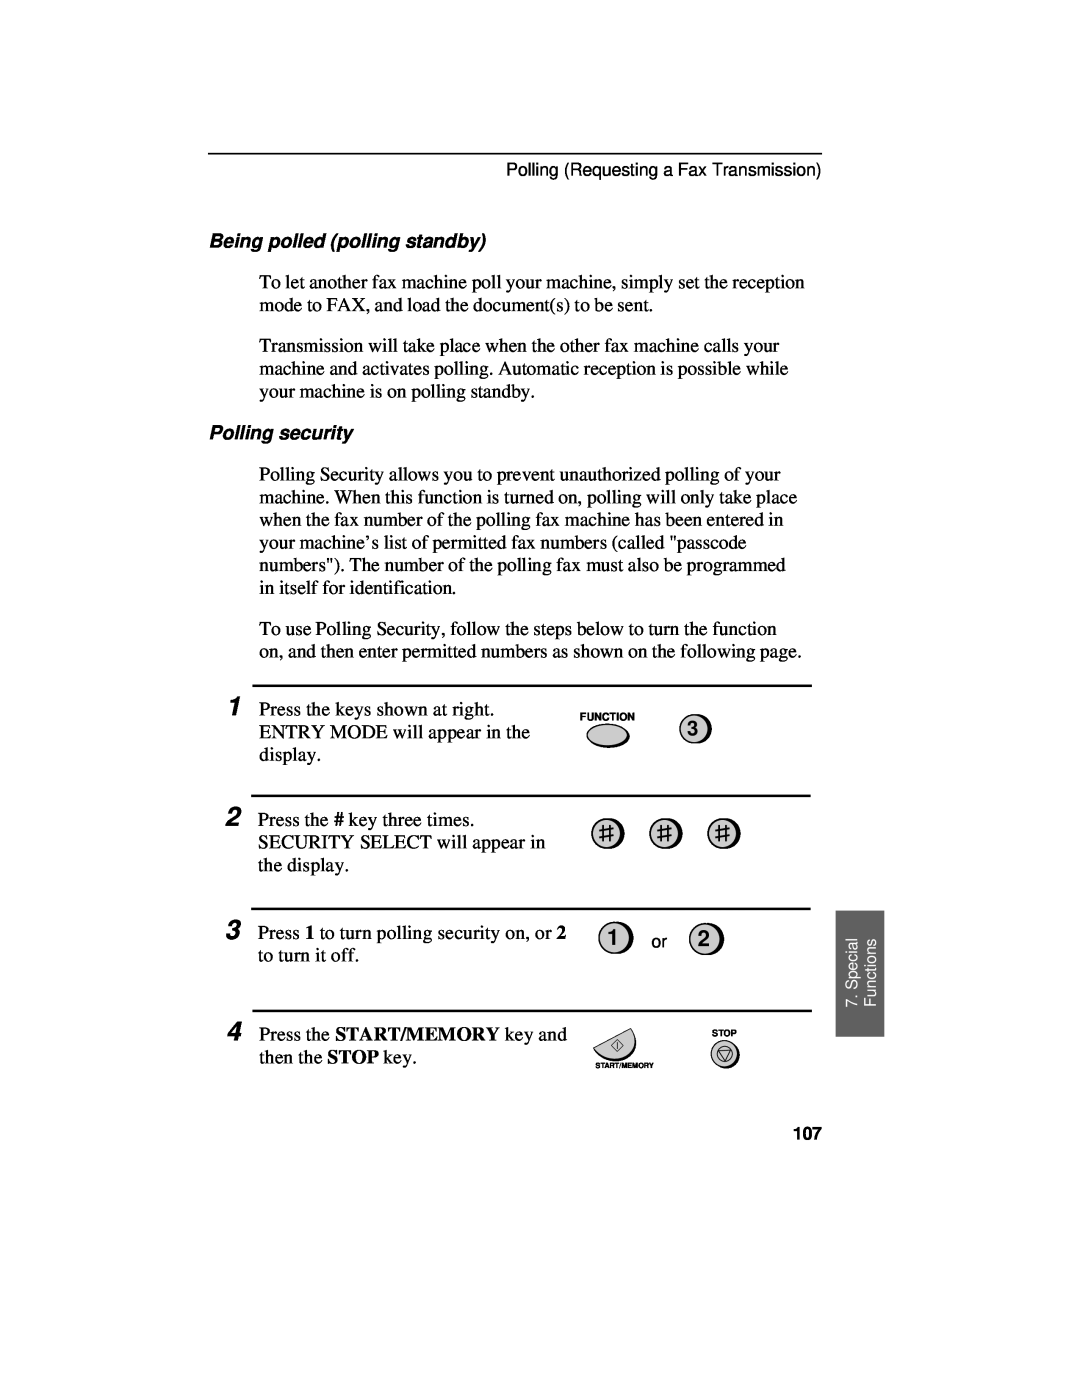 Sharp UX-460 operation manual 1 or, Being polled polling standby, Polling security 